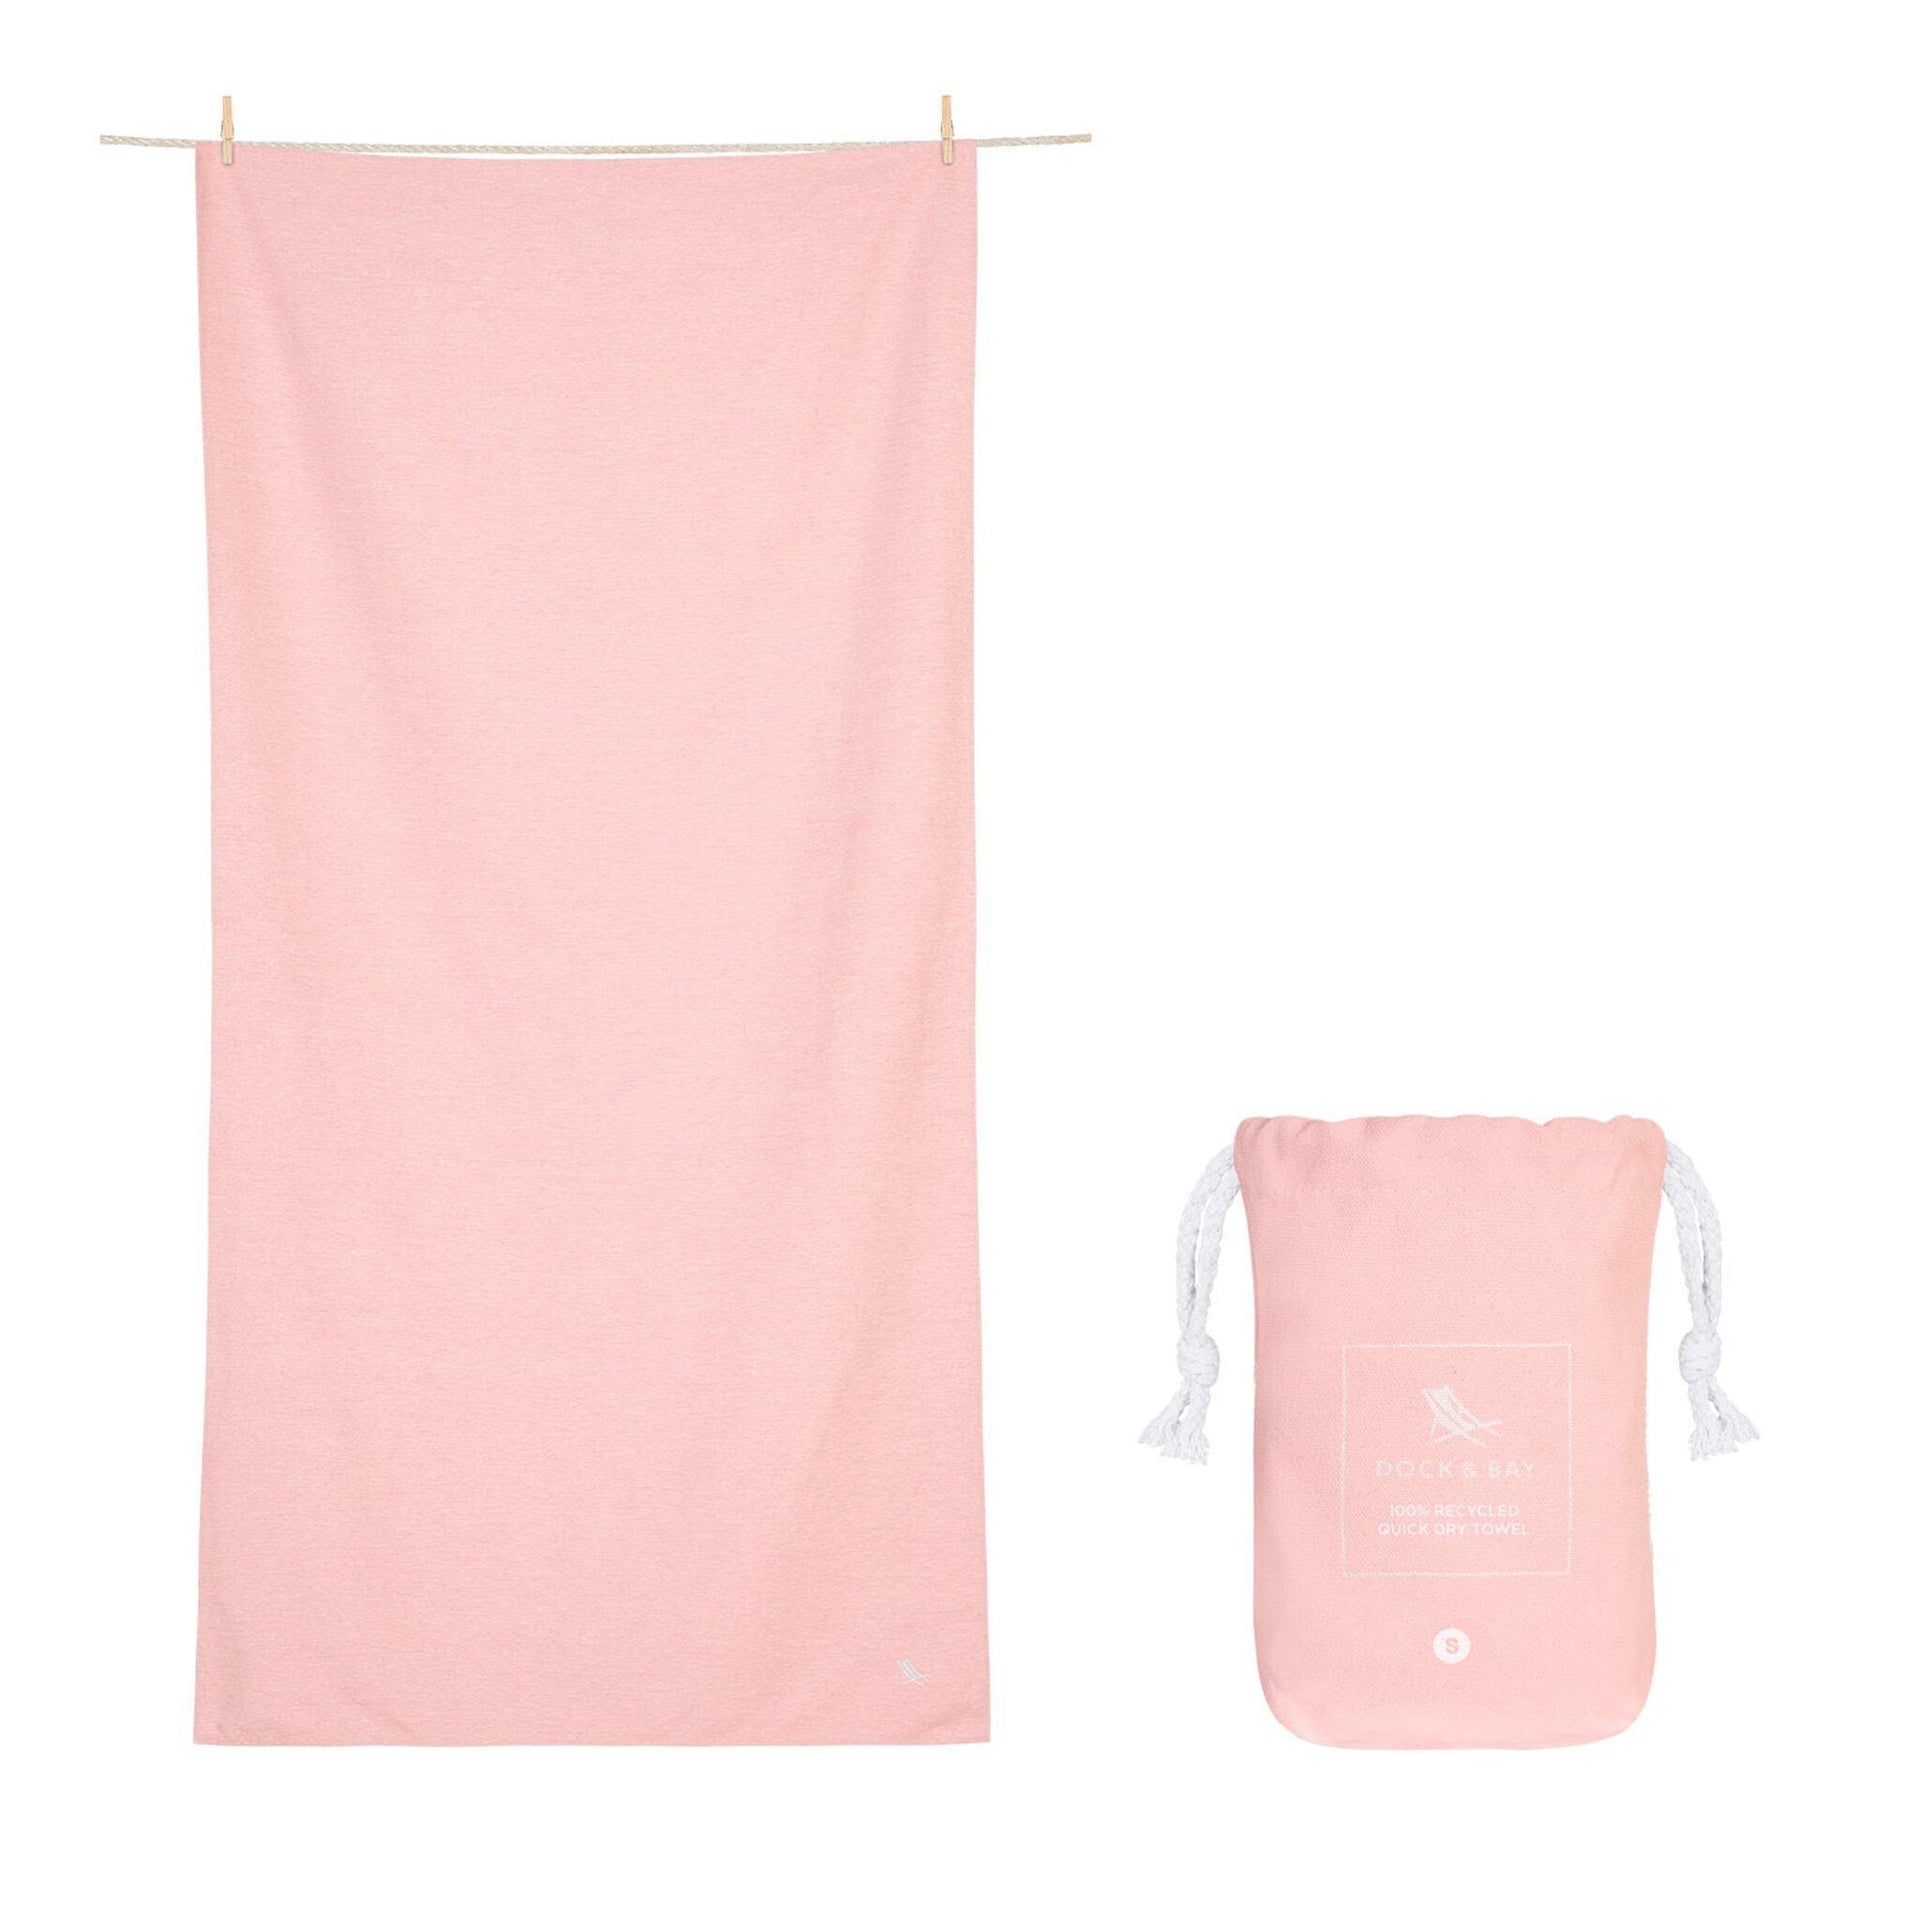 Dock & Bay Fitness Towel Essential Collection 30% Recycled - Upcycle Studio